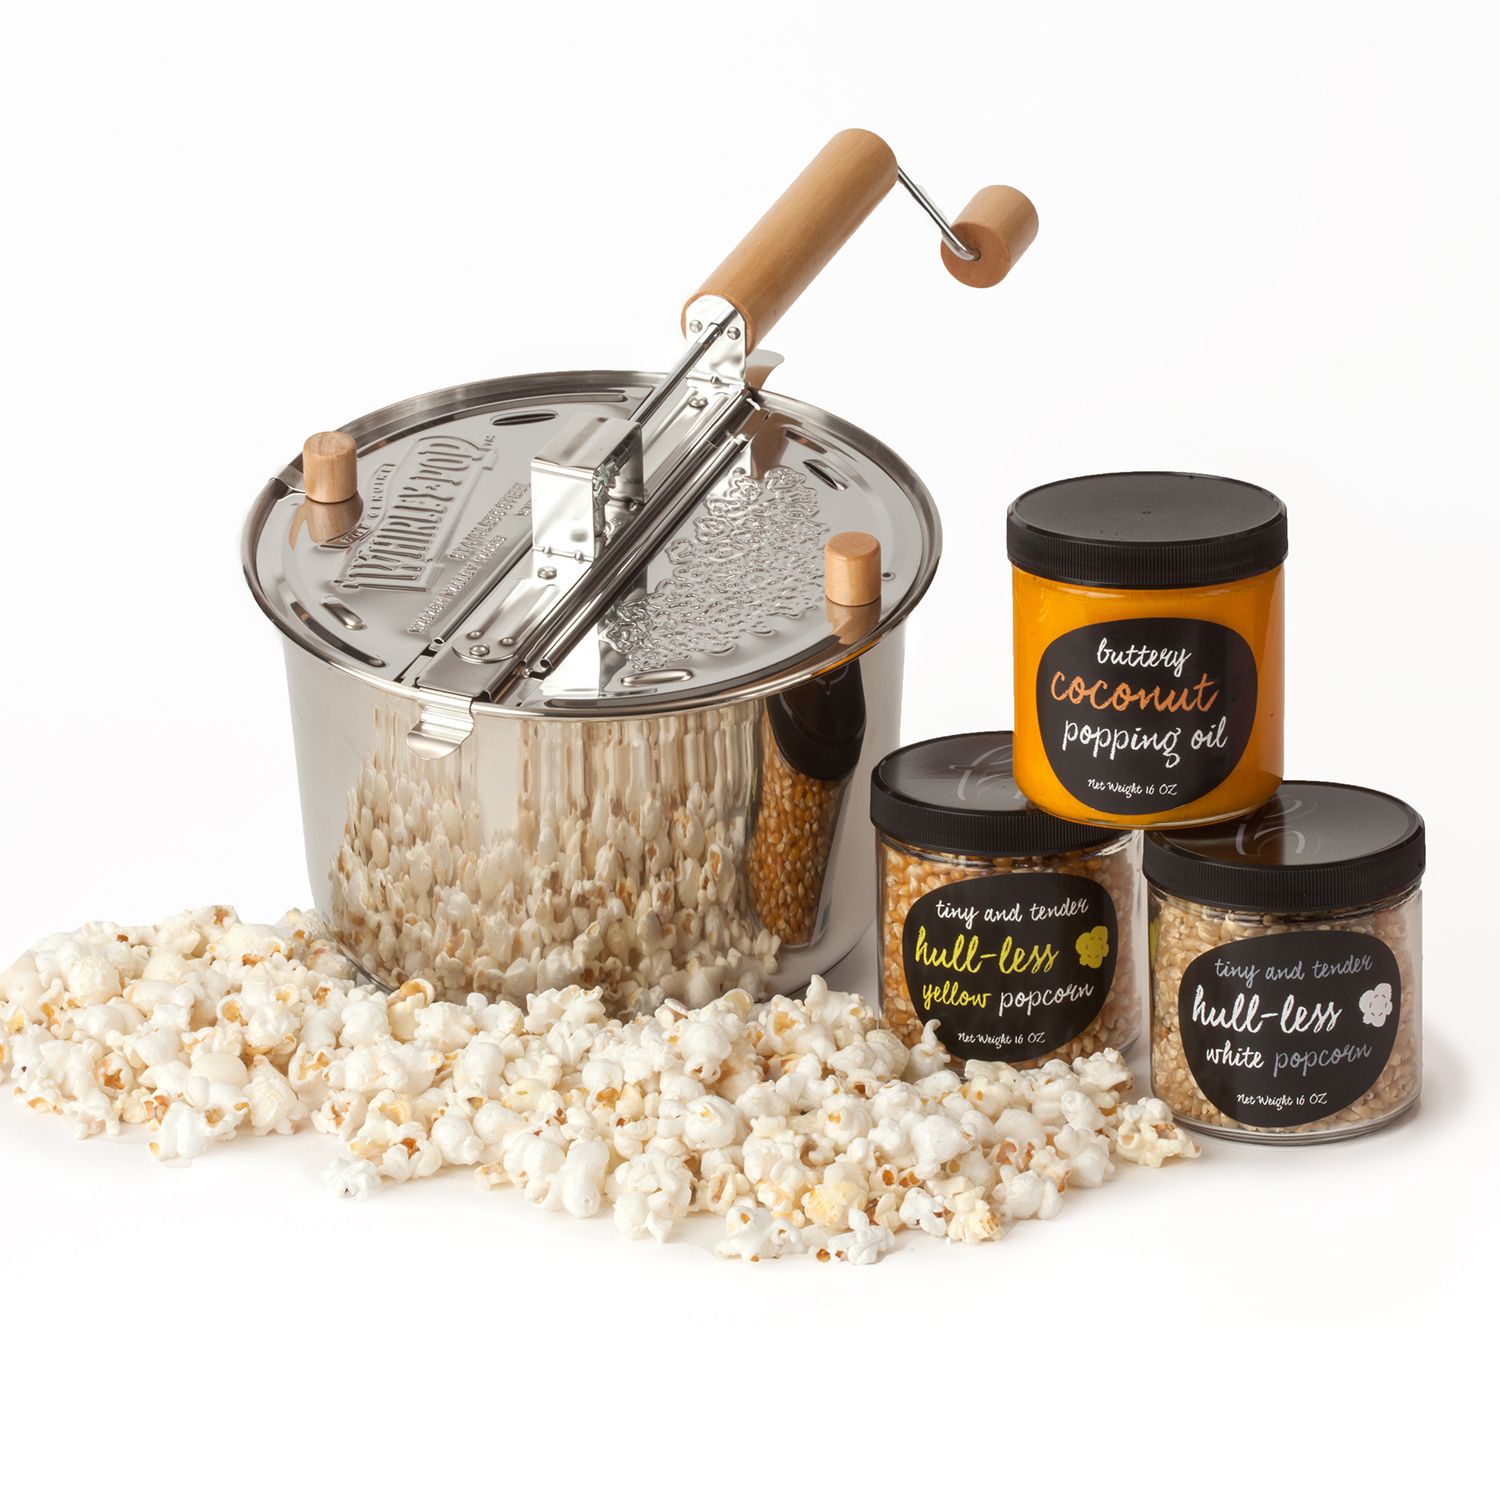 Wabash Valley Farms Silver Metal Gear Whirley Pop Stovetop Popcorn Popper  Caramel Creation Kit